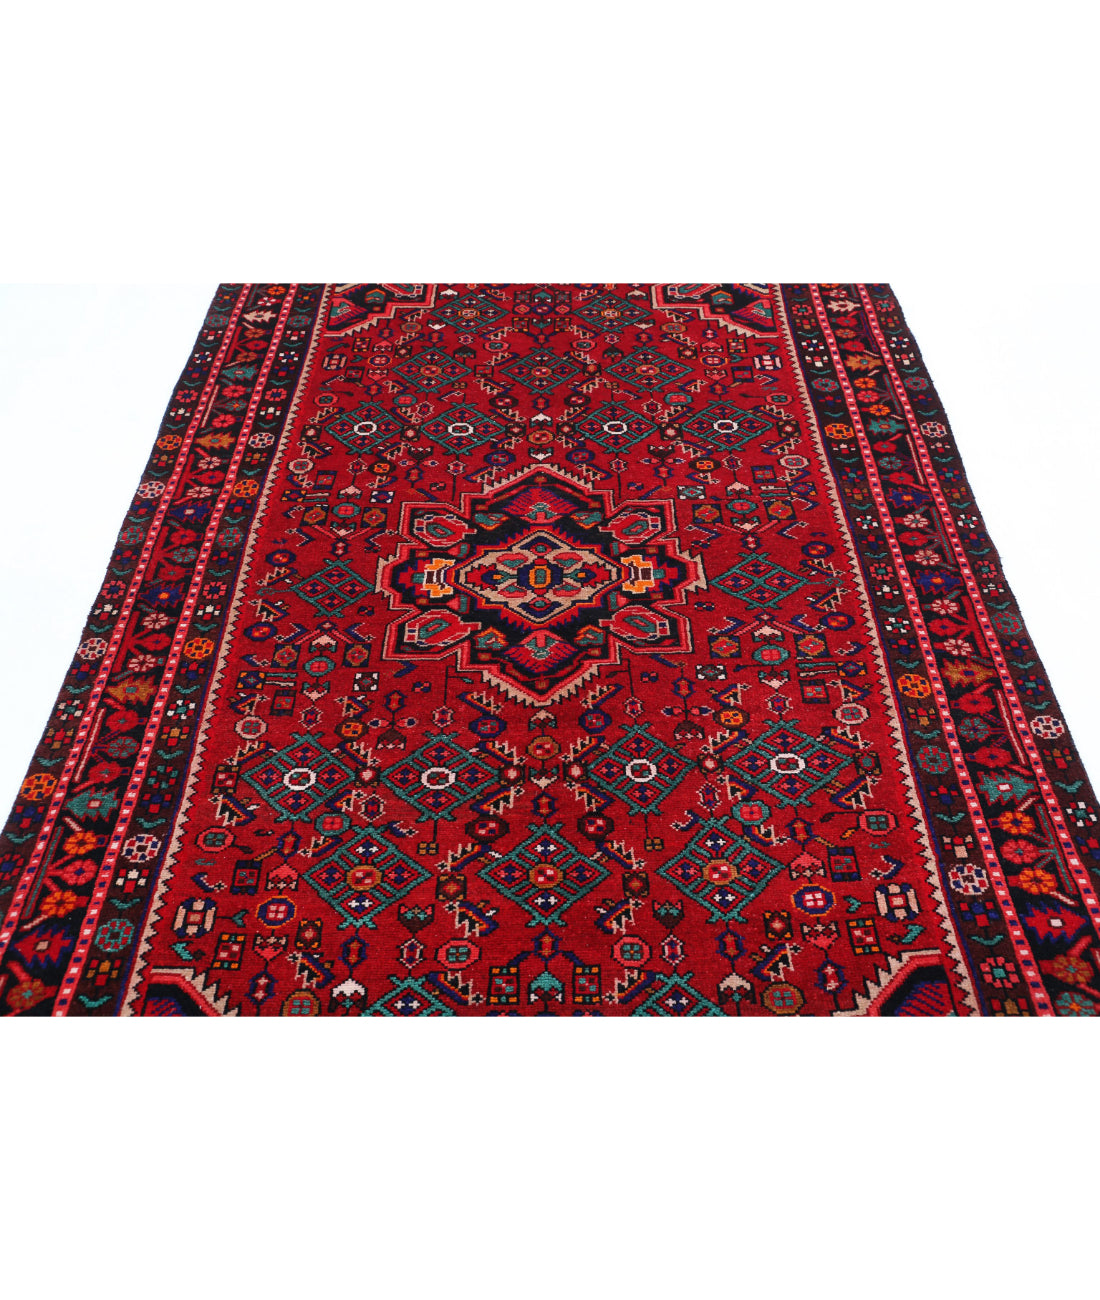 Hand Knotted Persian Hamadan Wool Rug - 5'4'' x 7'11'' 5'4'' x 7'11'' (160 X 238) / Red / Black